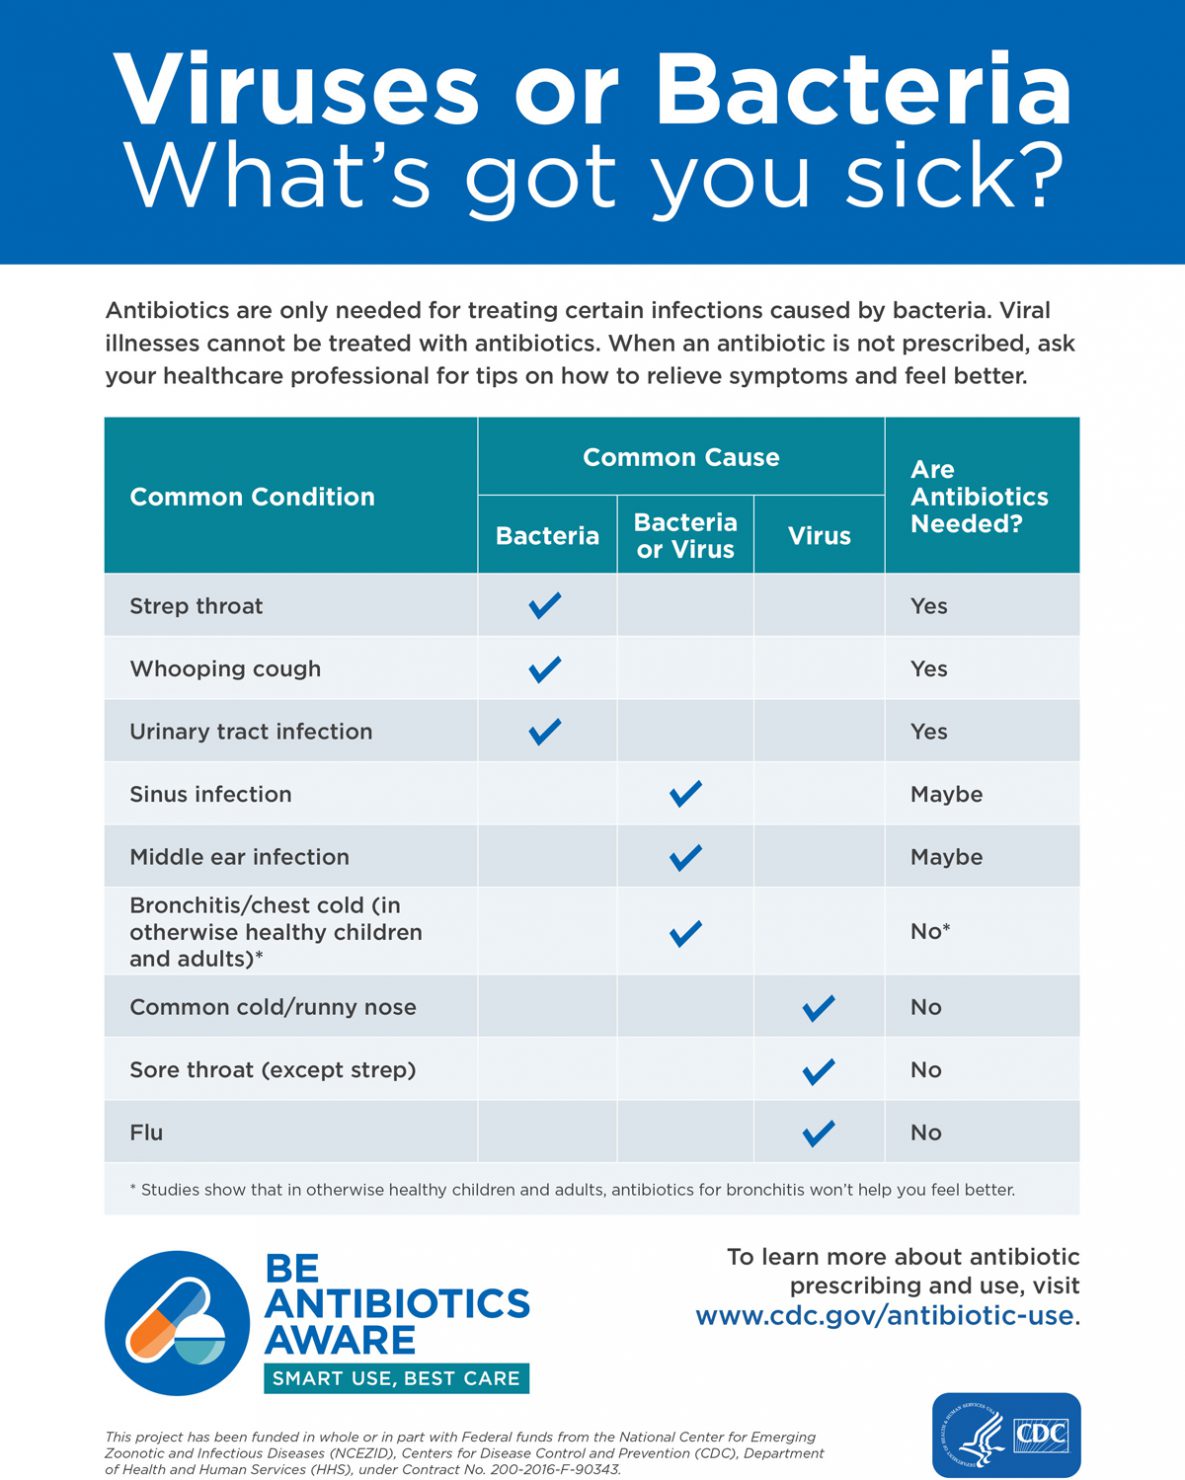 Viruses or bacteria : what's got you sick?